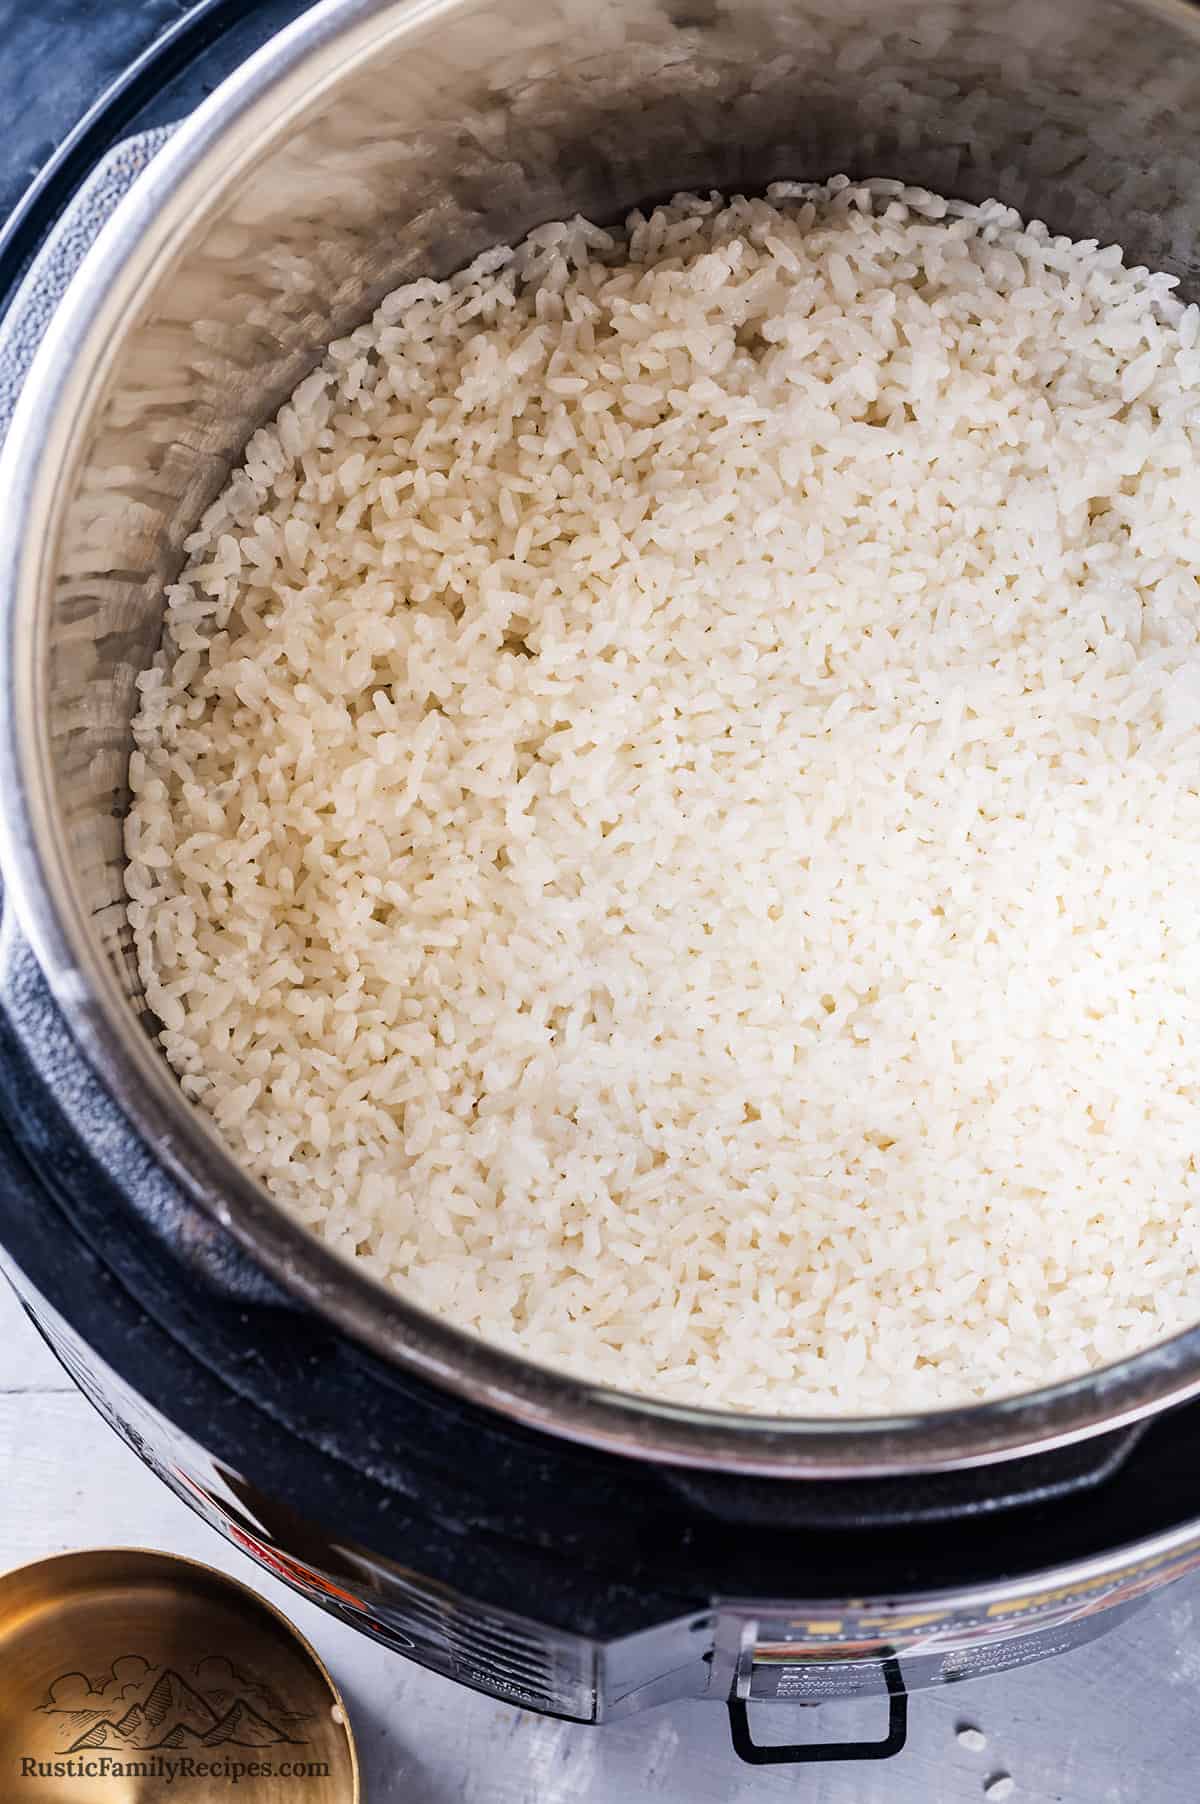 Instant Pot container with sushi rice ready to be cooked